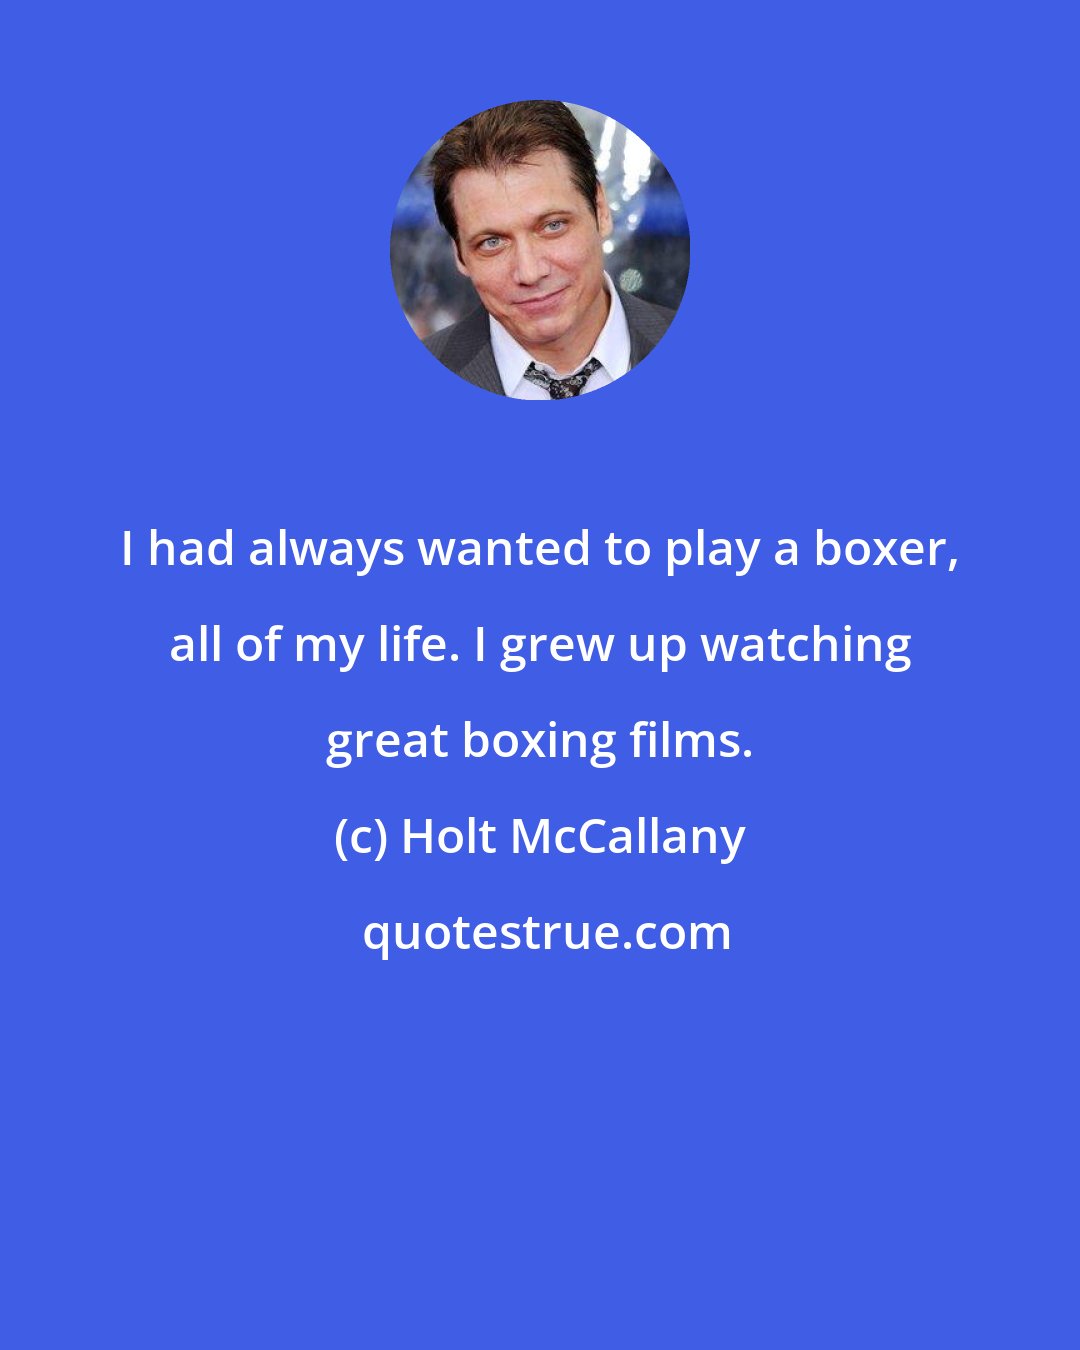 Holt McCallany: I had always wanted to play a boxer, all of my life. I grew up watching great boxing films.